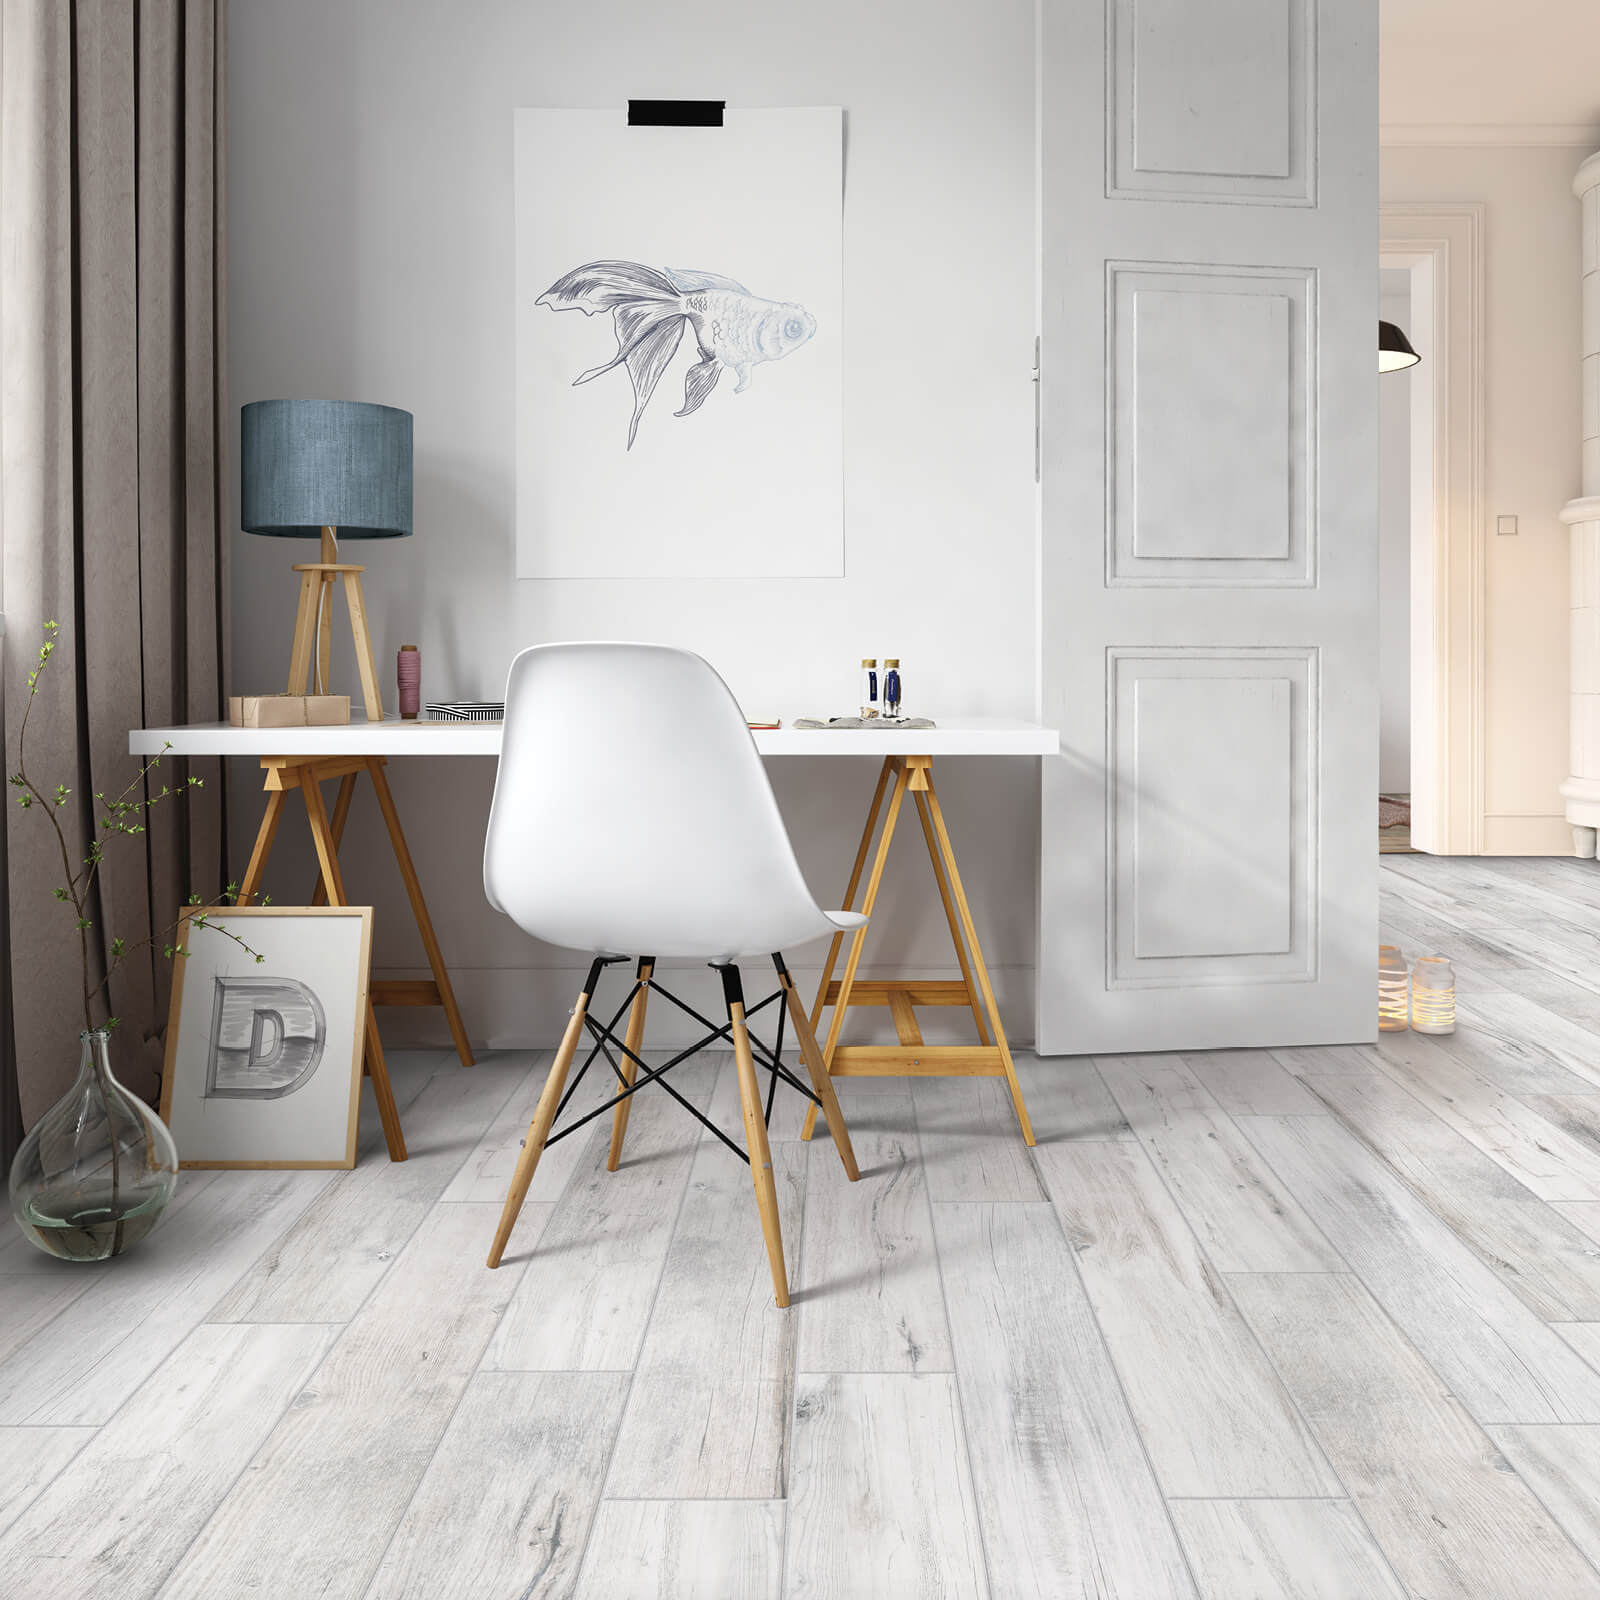 Chair on tile flooring | The L&L Company